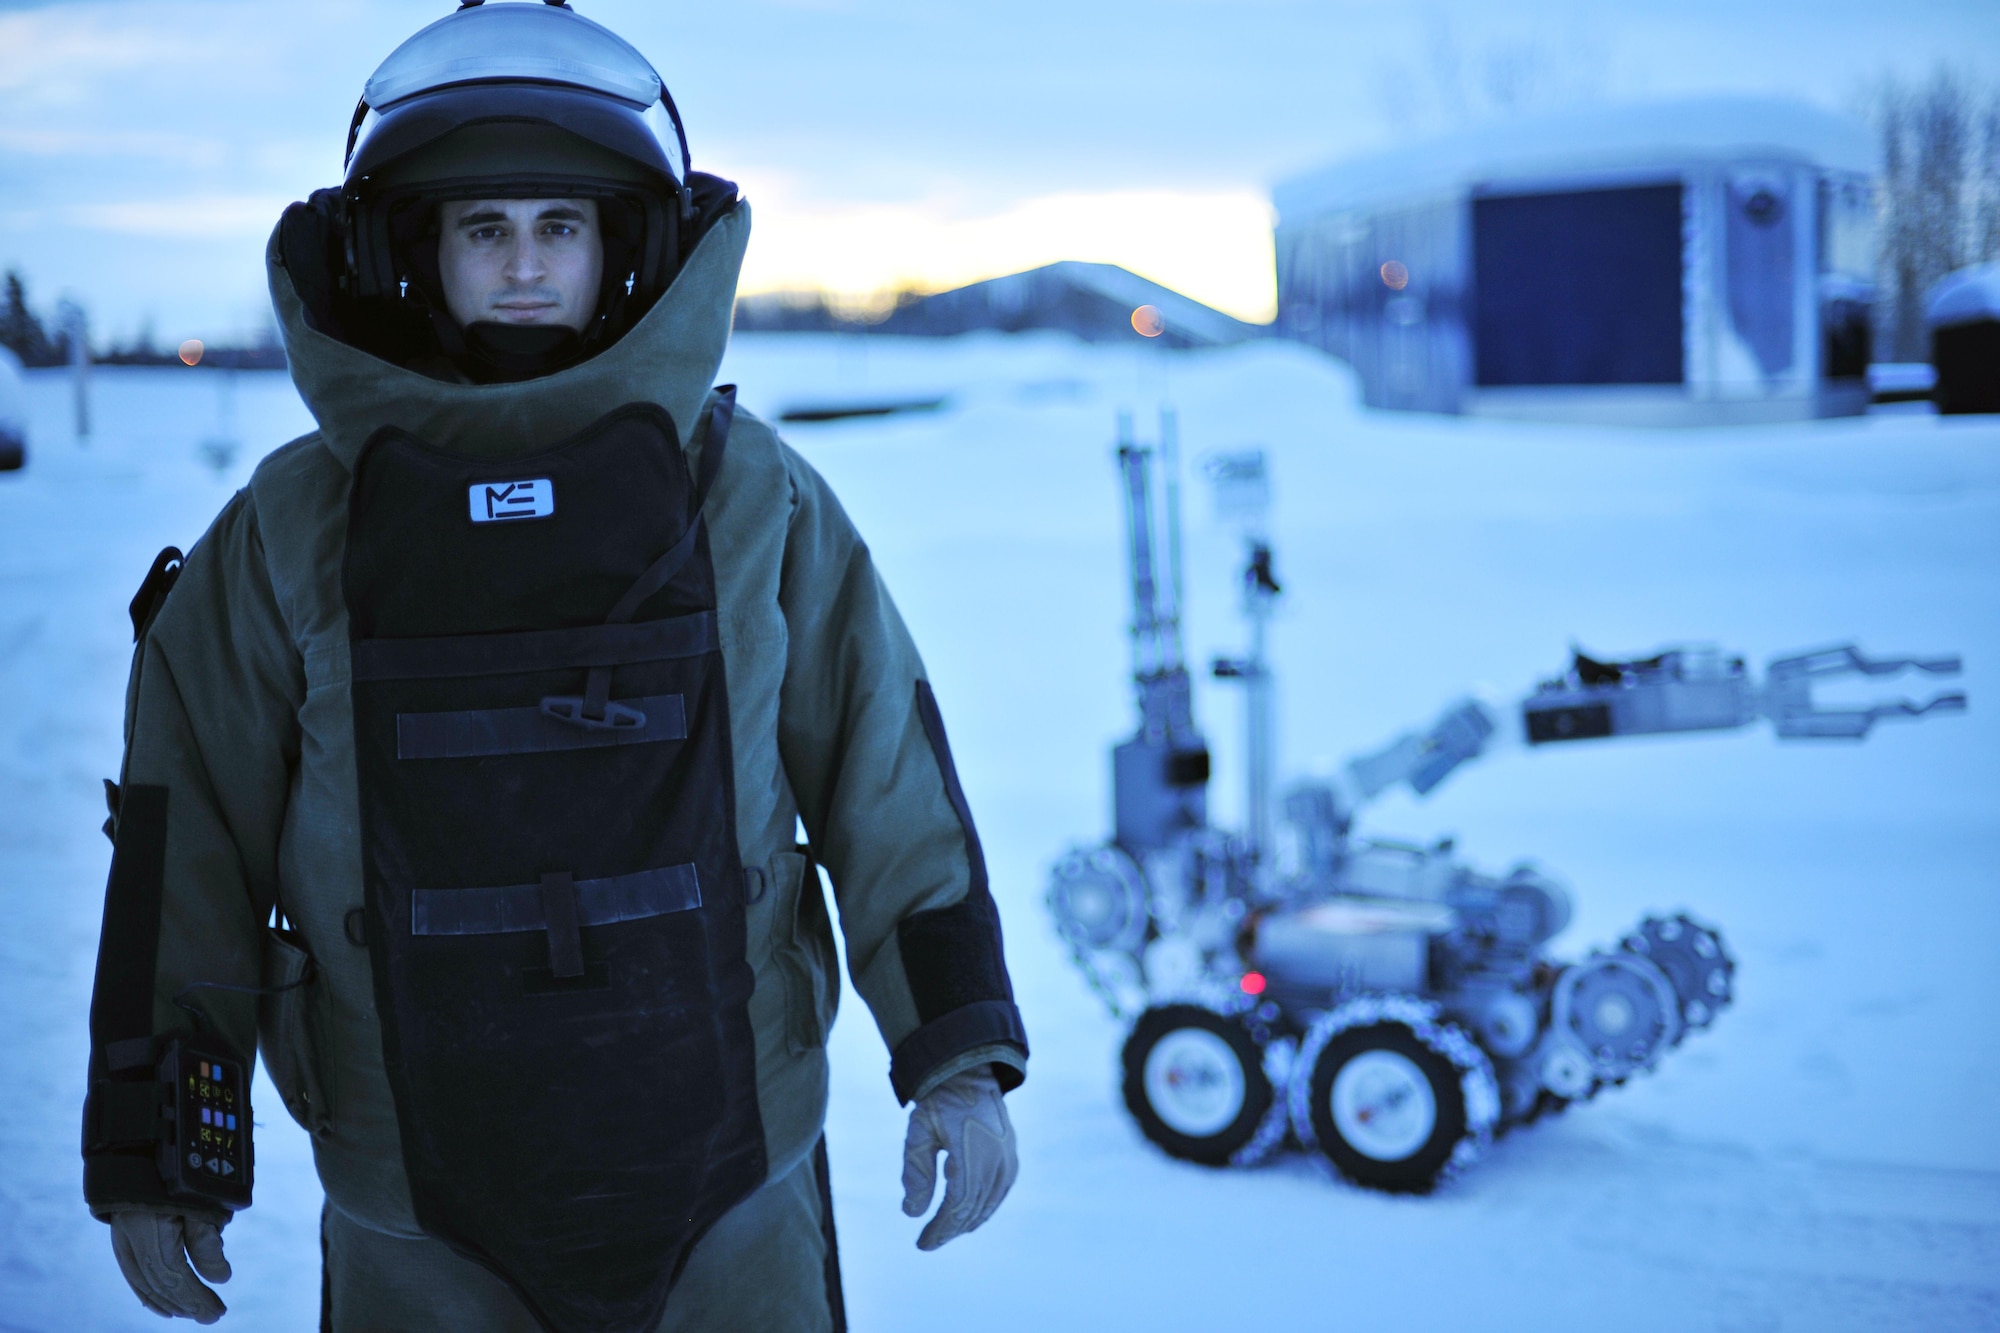 Staff Sgt. Joseph Riemer stands by an F6A robot in an explosive ordnance disposal bomb suit Jan. 21, 2014, at Eielson Air Force Base, Alaska.  Reimer works as an EOD disposal technician with the 354th Civil Engineer Squadron. (U.S. Air Force photo/Staff Sgt. Jim Araos)